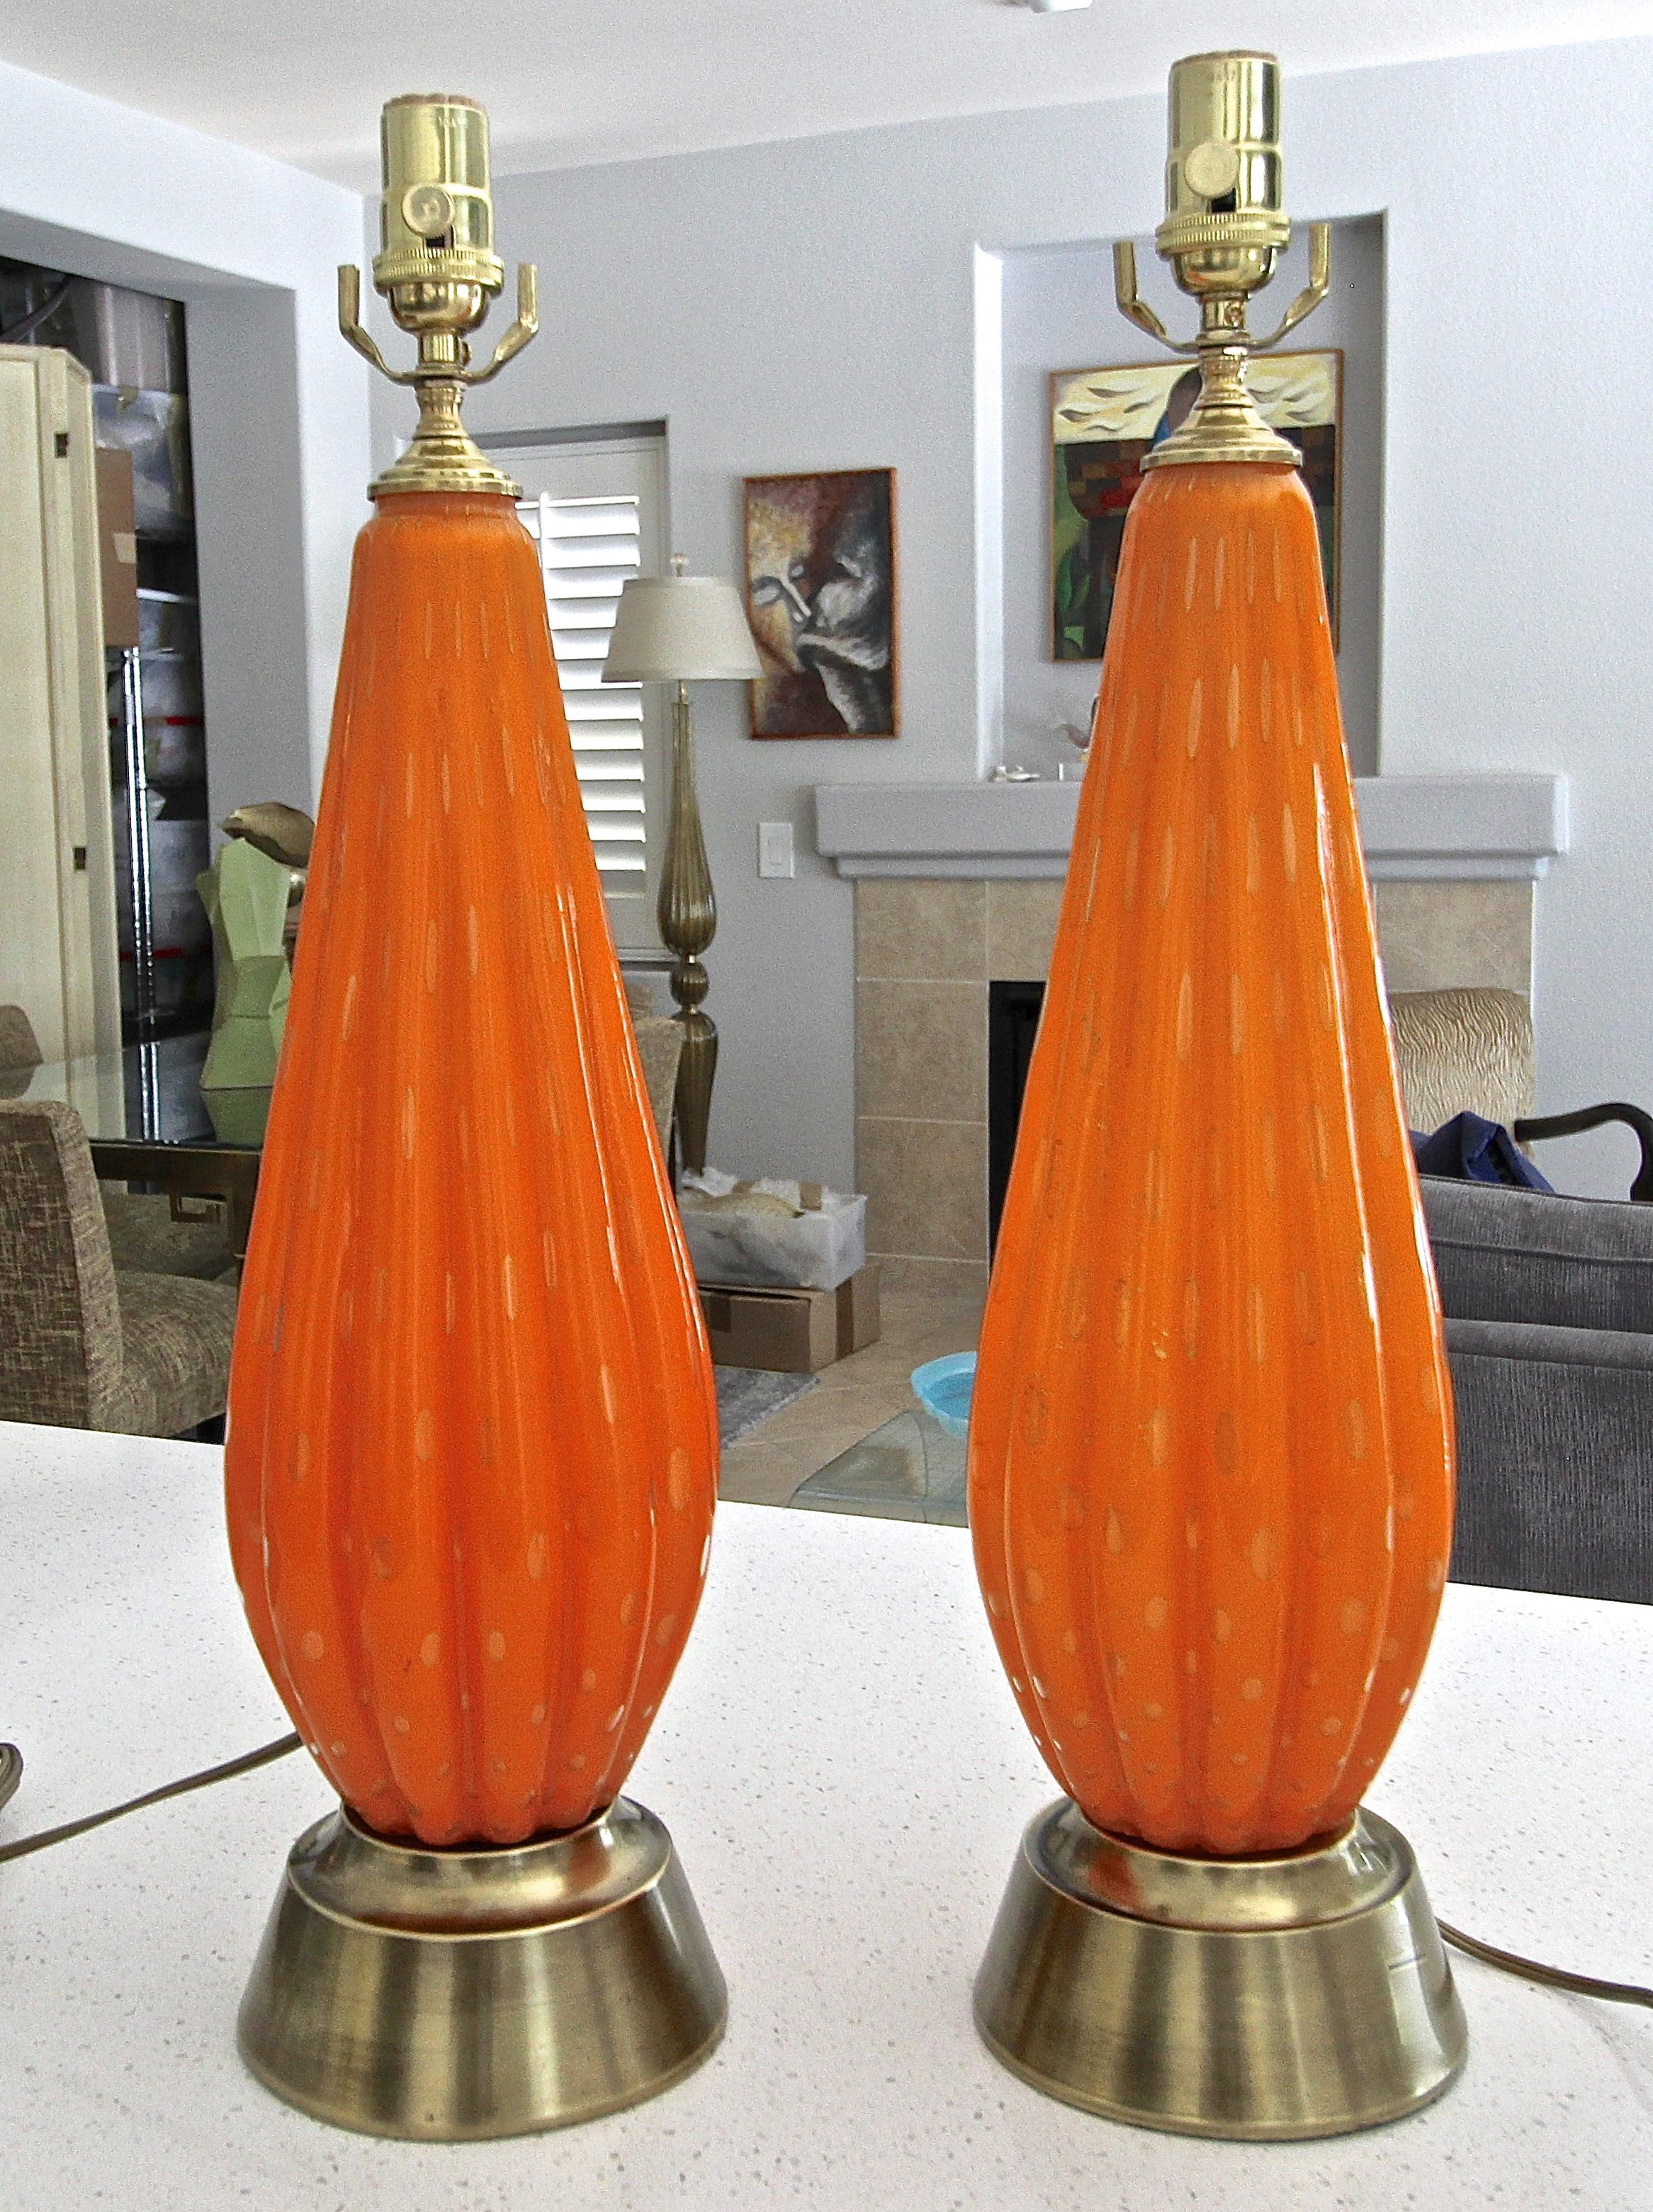 Pair of Italian Murano hand blown ribbed orange color glass table lamp with gold inclusions and controlled bubbles. The glass lamps are mounted on their original brass plated bases. Rewired with new brass 3 way socket and cord.
Measures: Glass